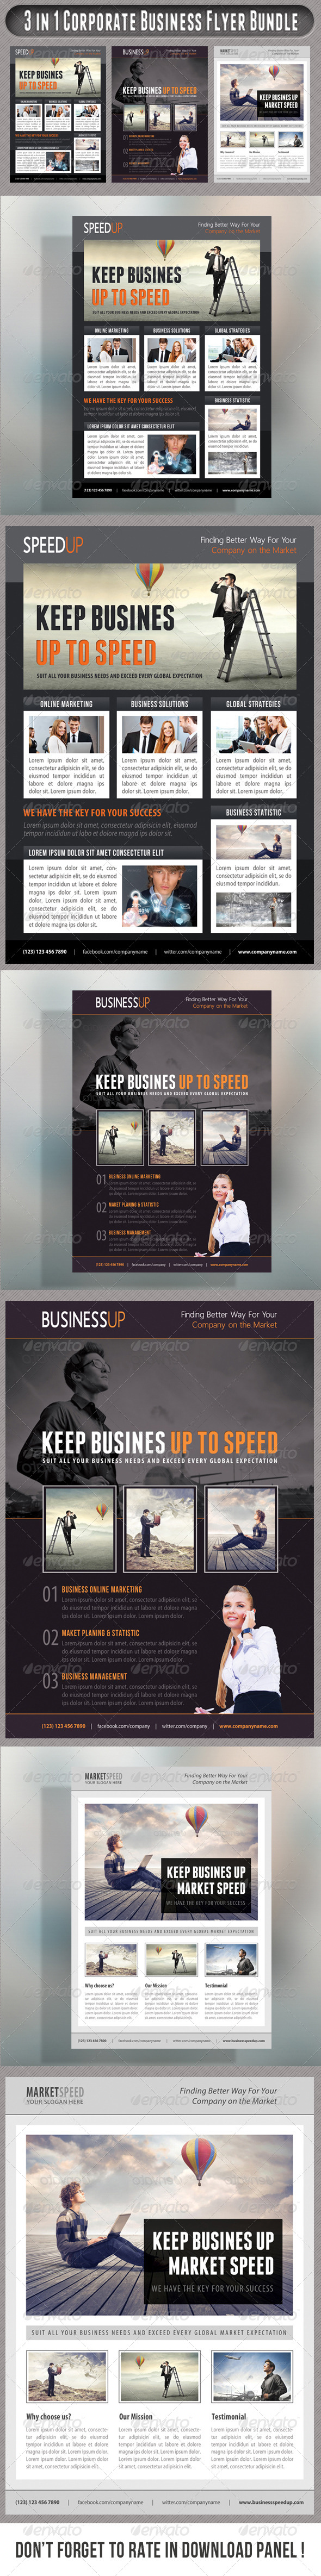 GraphicRiver 3 in 1 Corporate Flyers Bundle 20 7666340